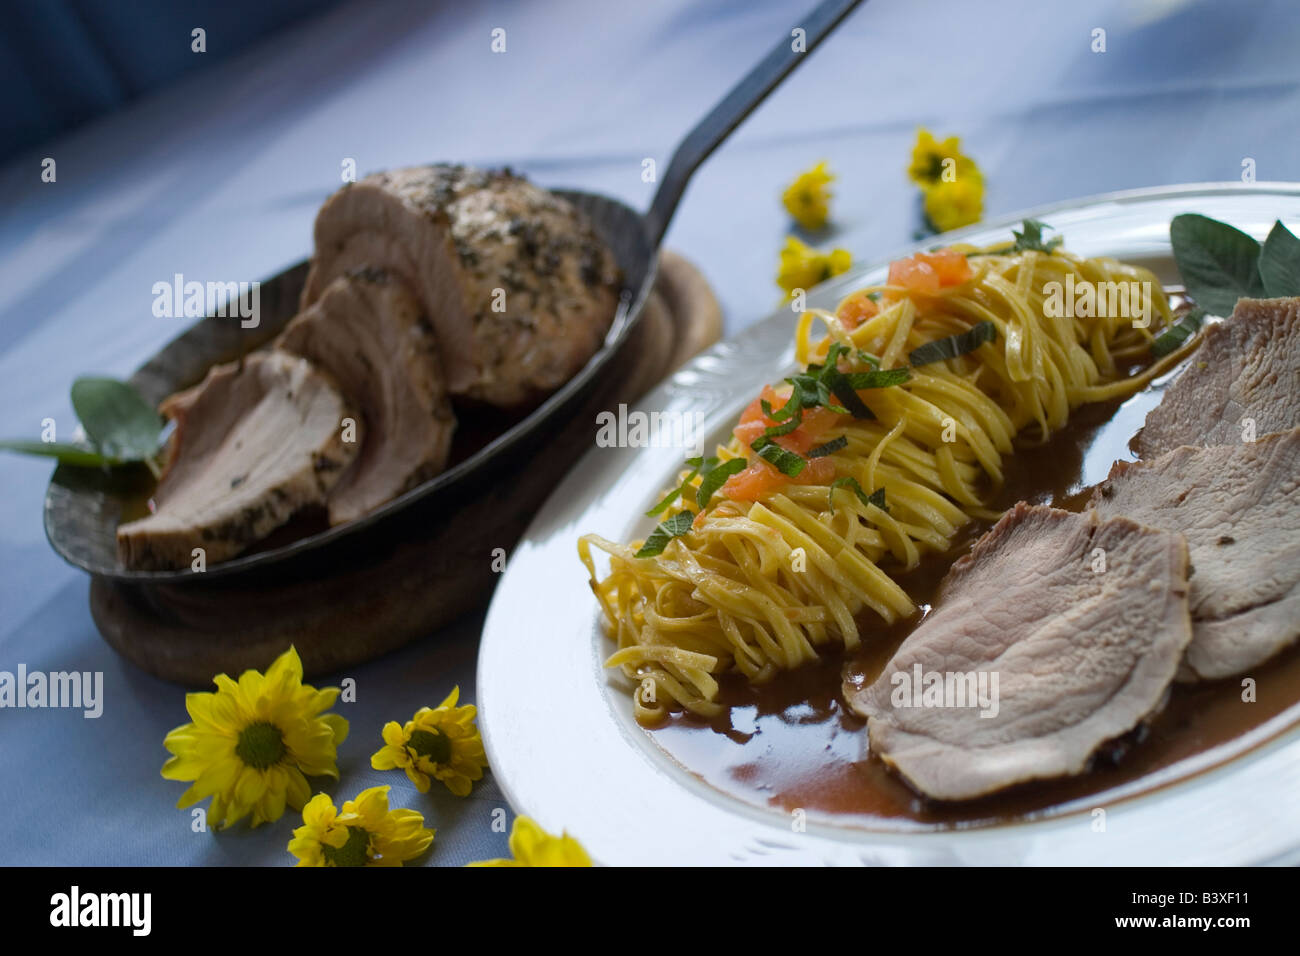 meal meat joint noodles sauce vegetable vine white flower yellow Stock Photo